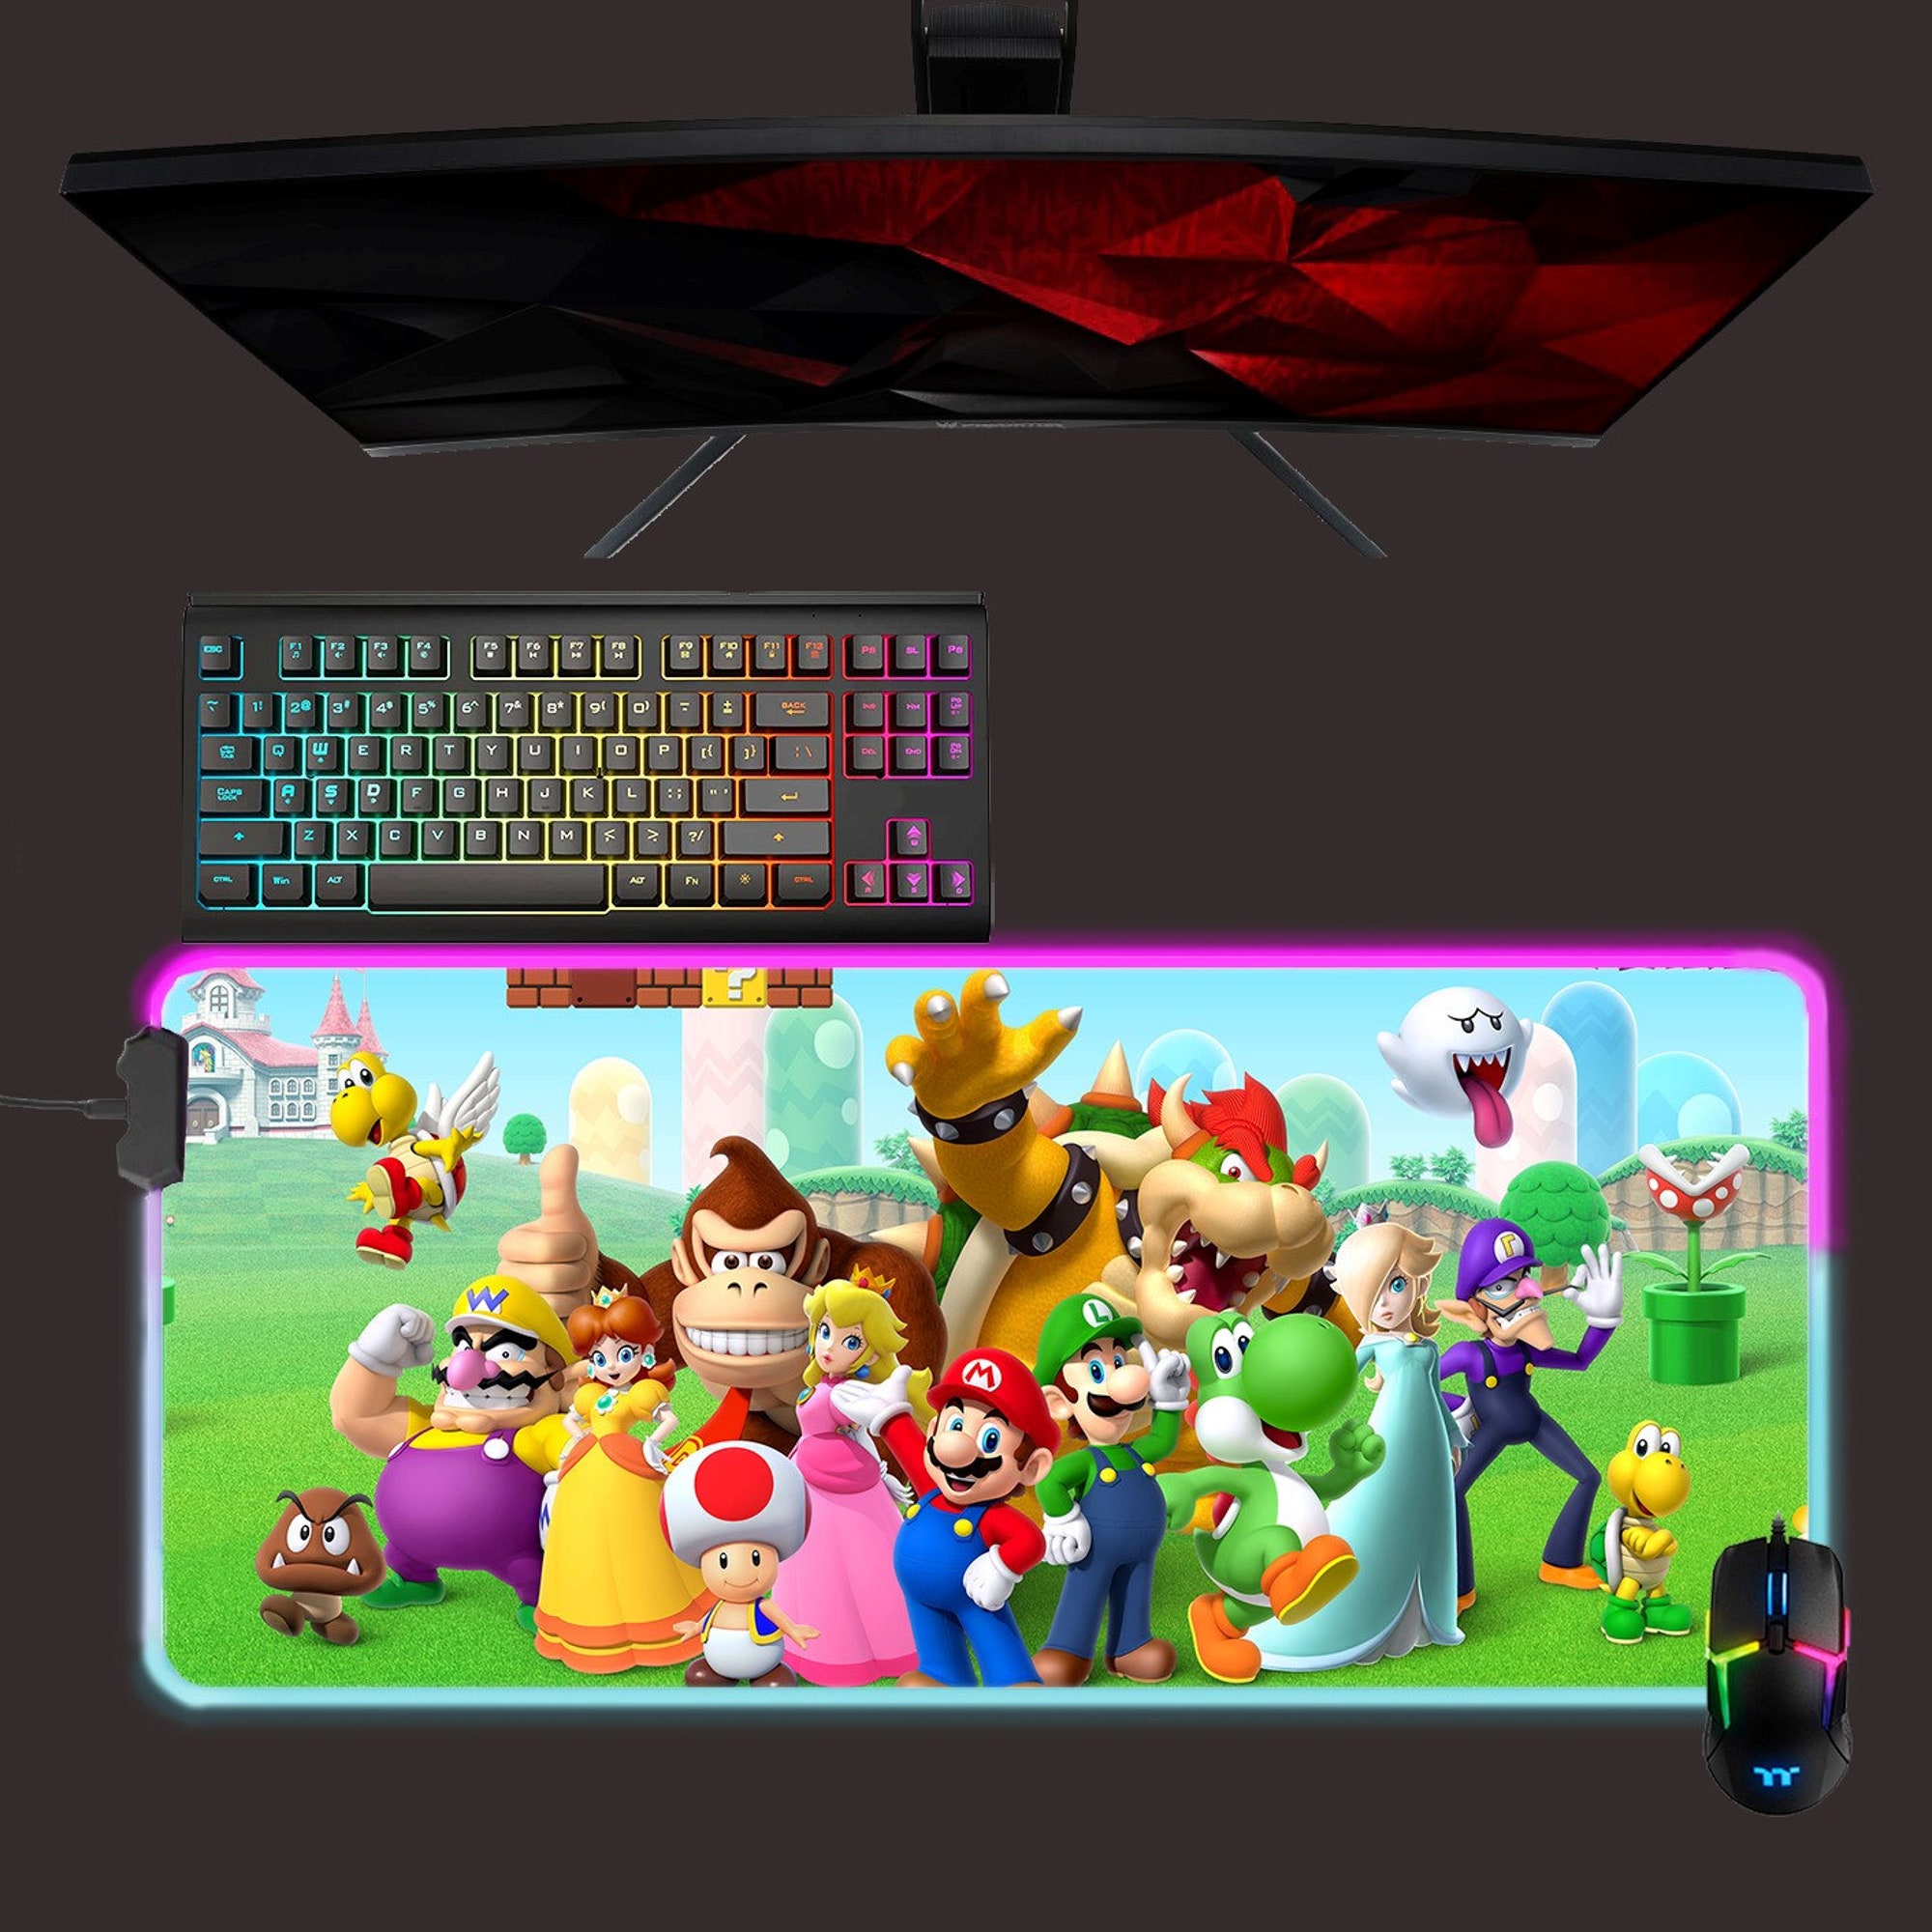 Super Mario led mouse mat, Bowser rgb mouse pad, gaming mouse pad